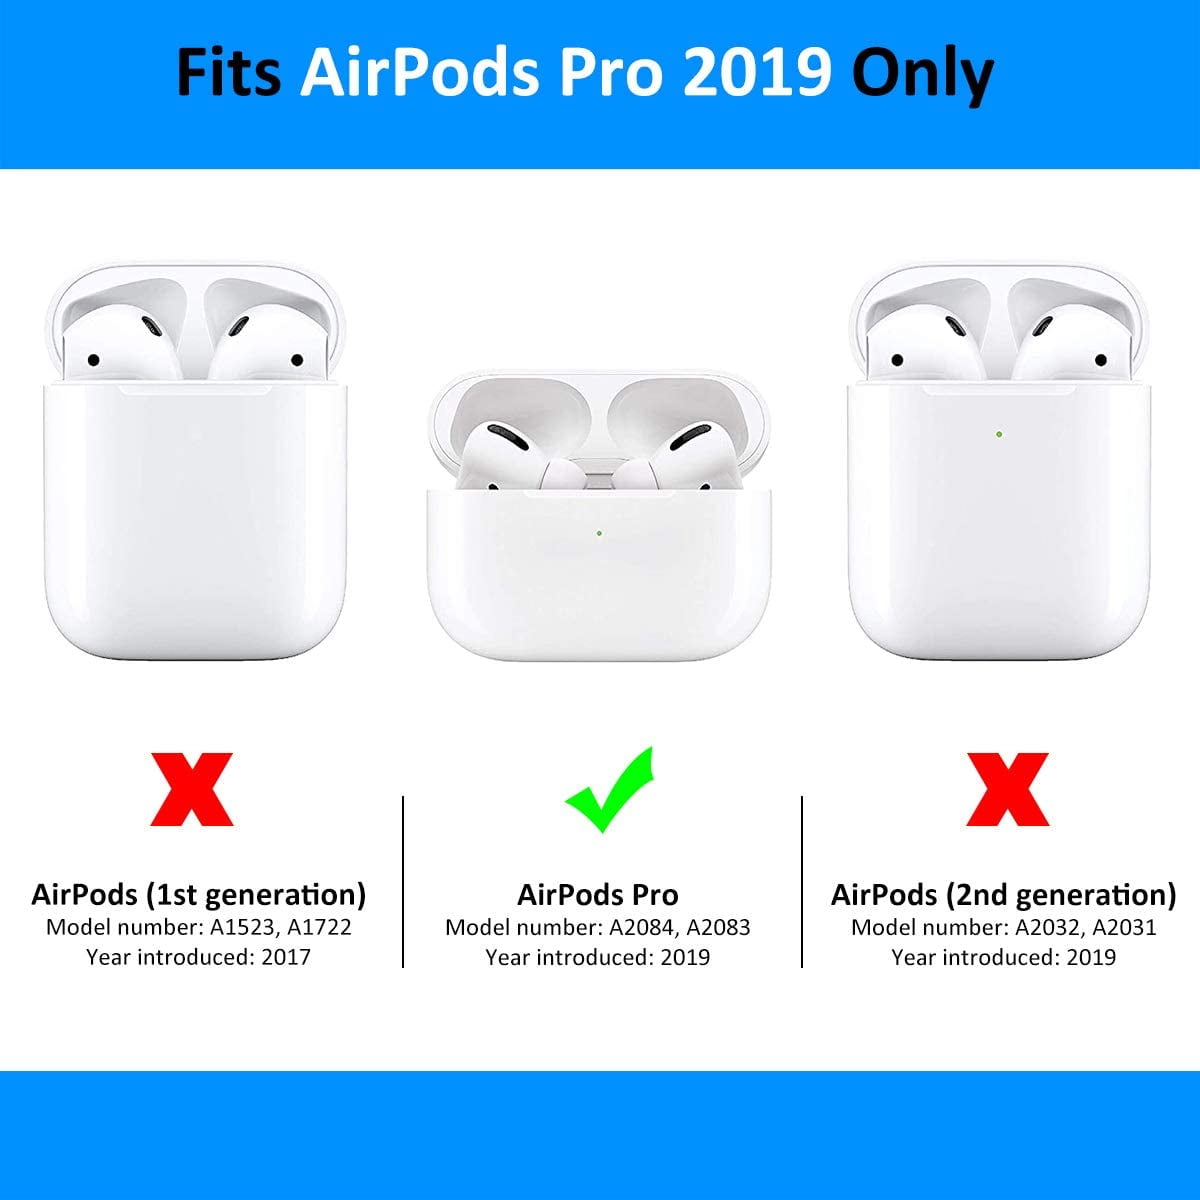 AirPods Pro A2084